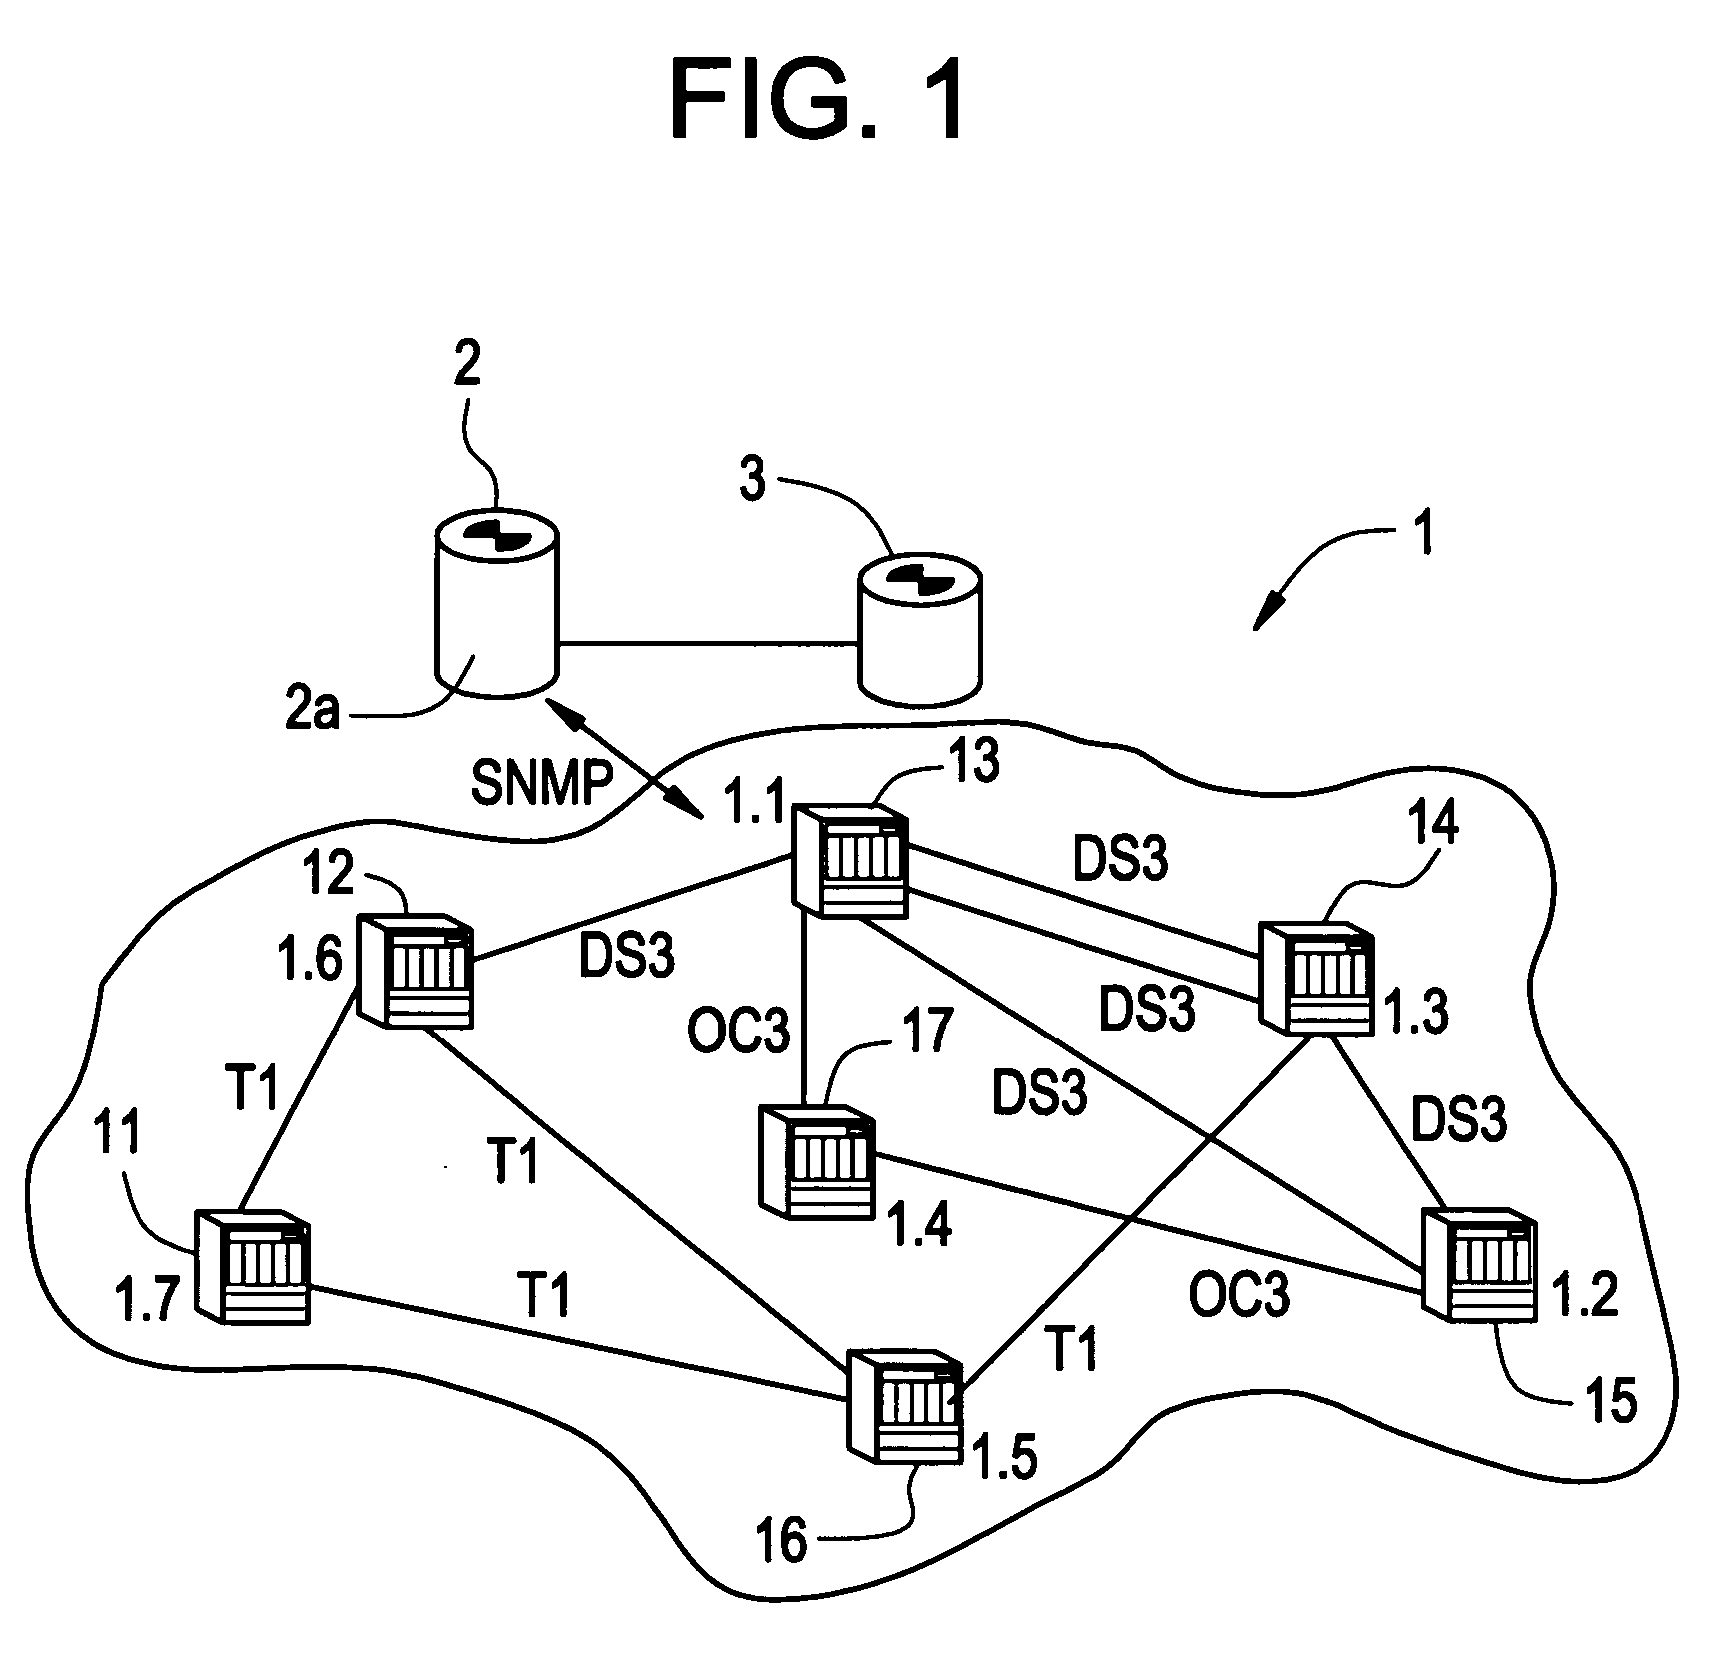 Methods and systems for alleviating congestion in a connection-oriented data network